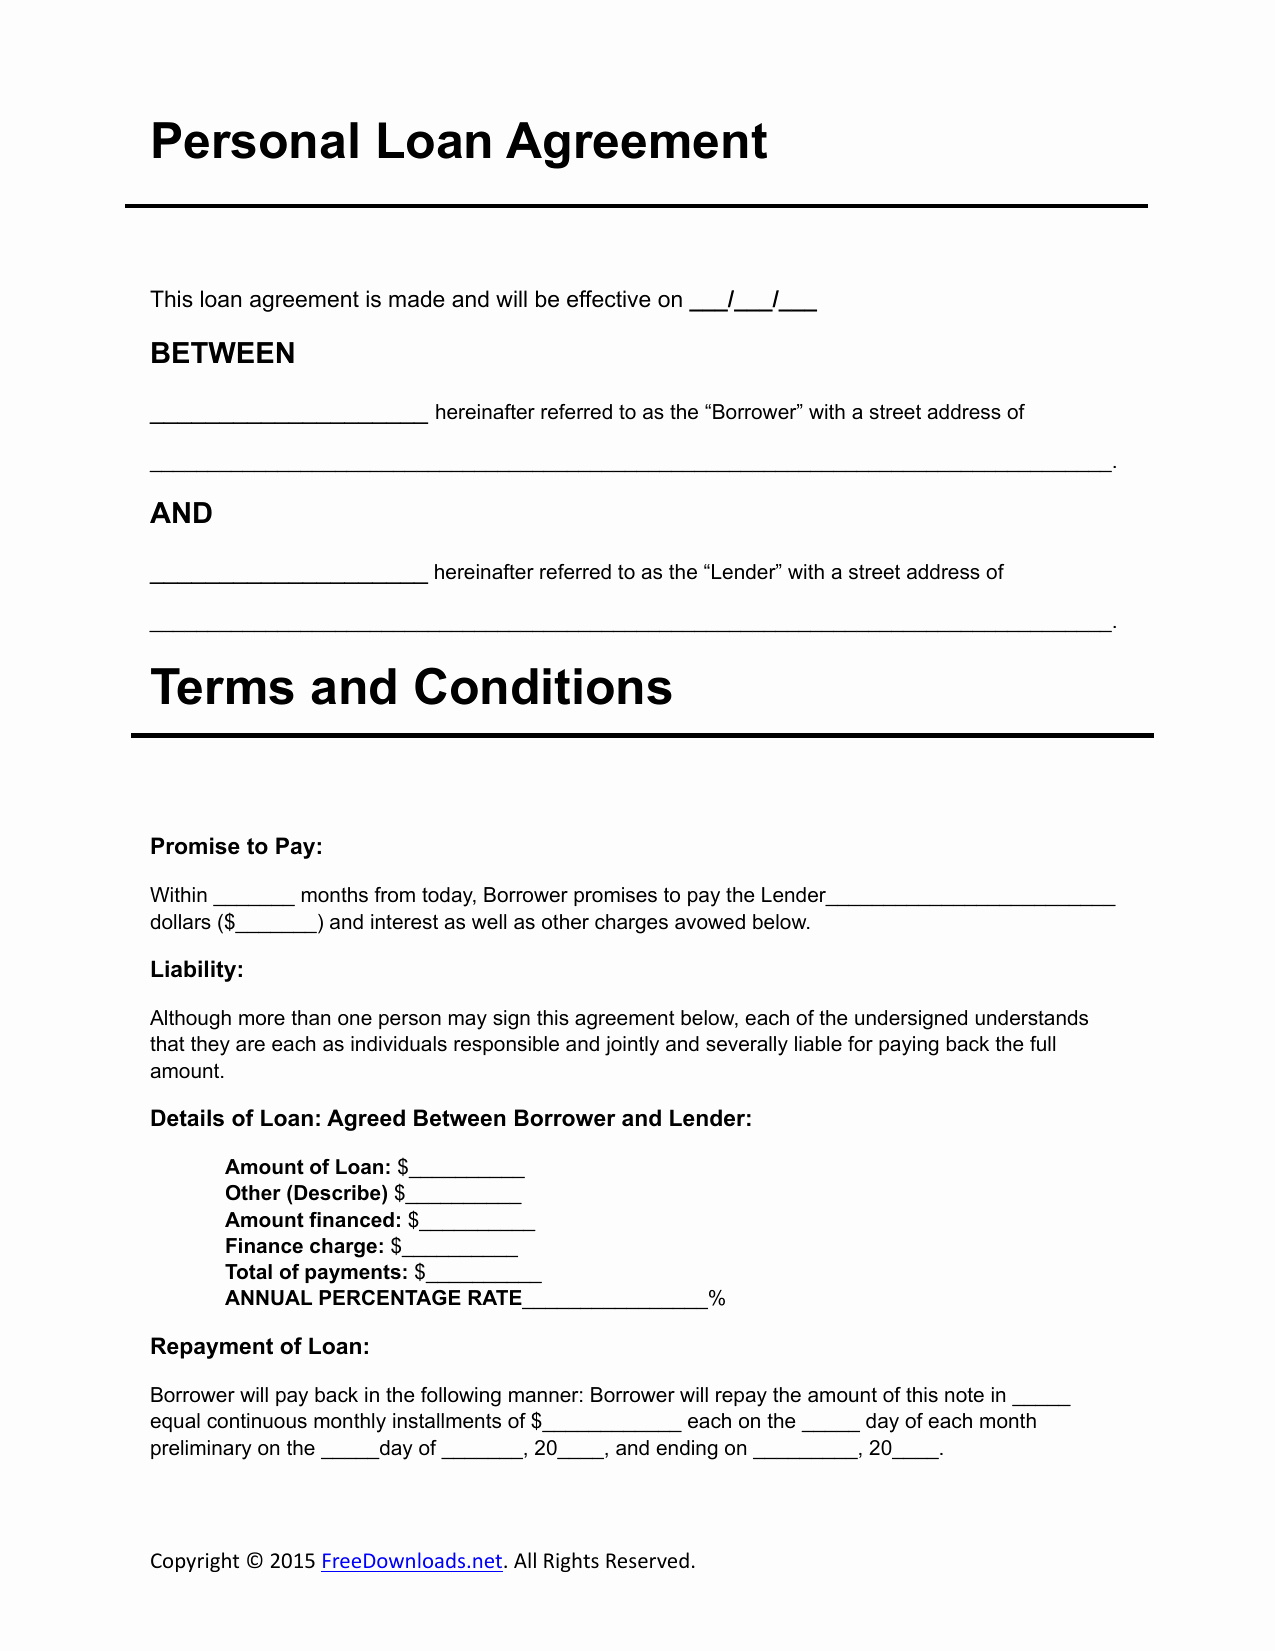 Free Personal Loan Agreement Template Lovely Download Personal Loan Agreement Template Pdf